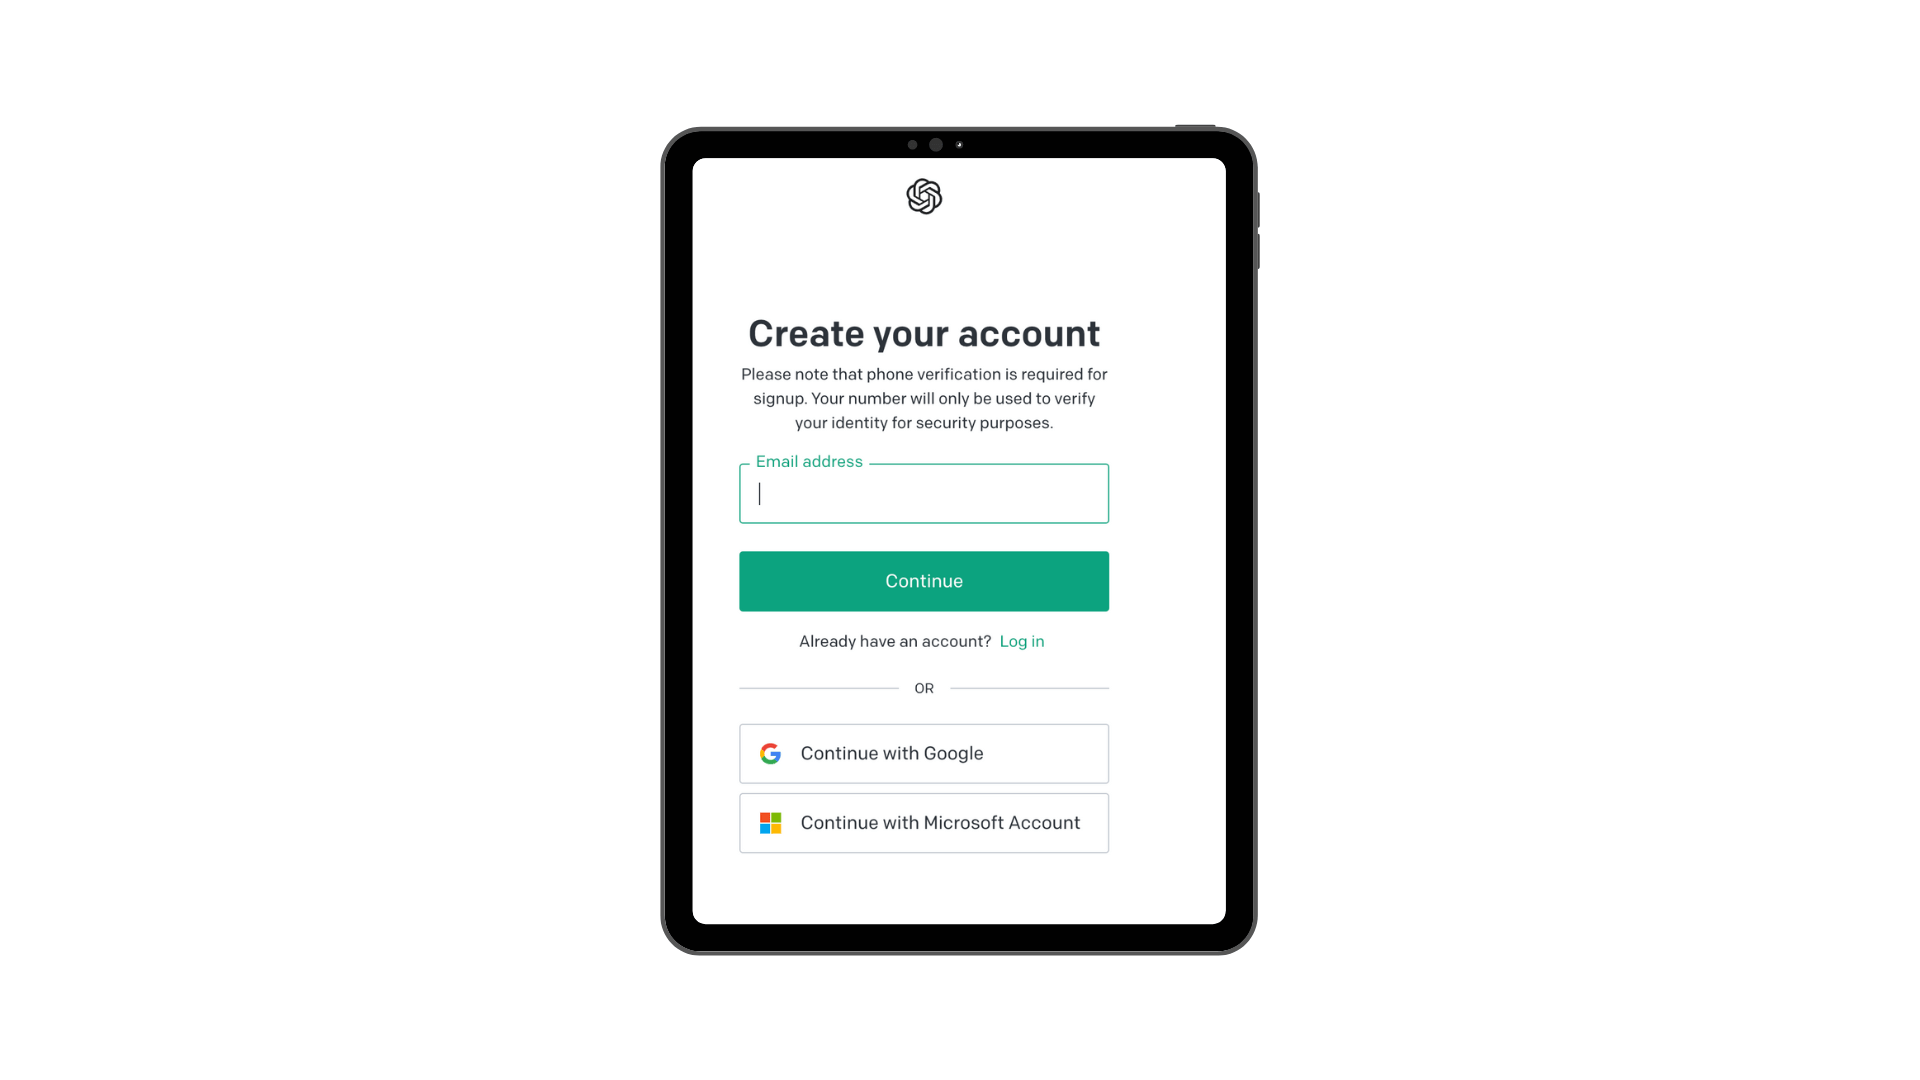 An image on an iPad showing the "create your account" screen for ChatGPT